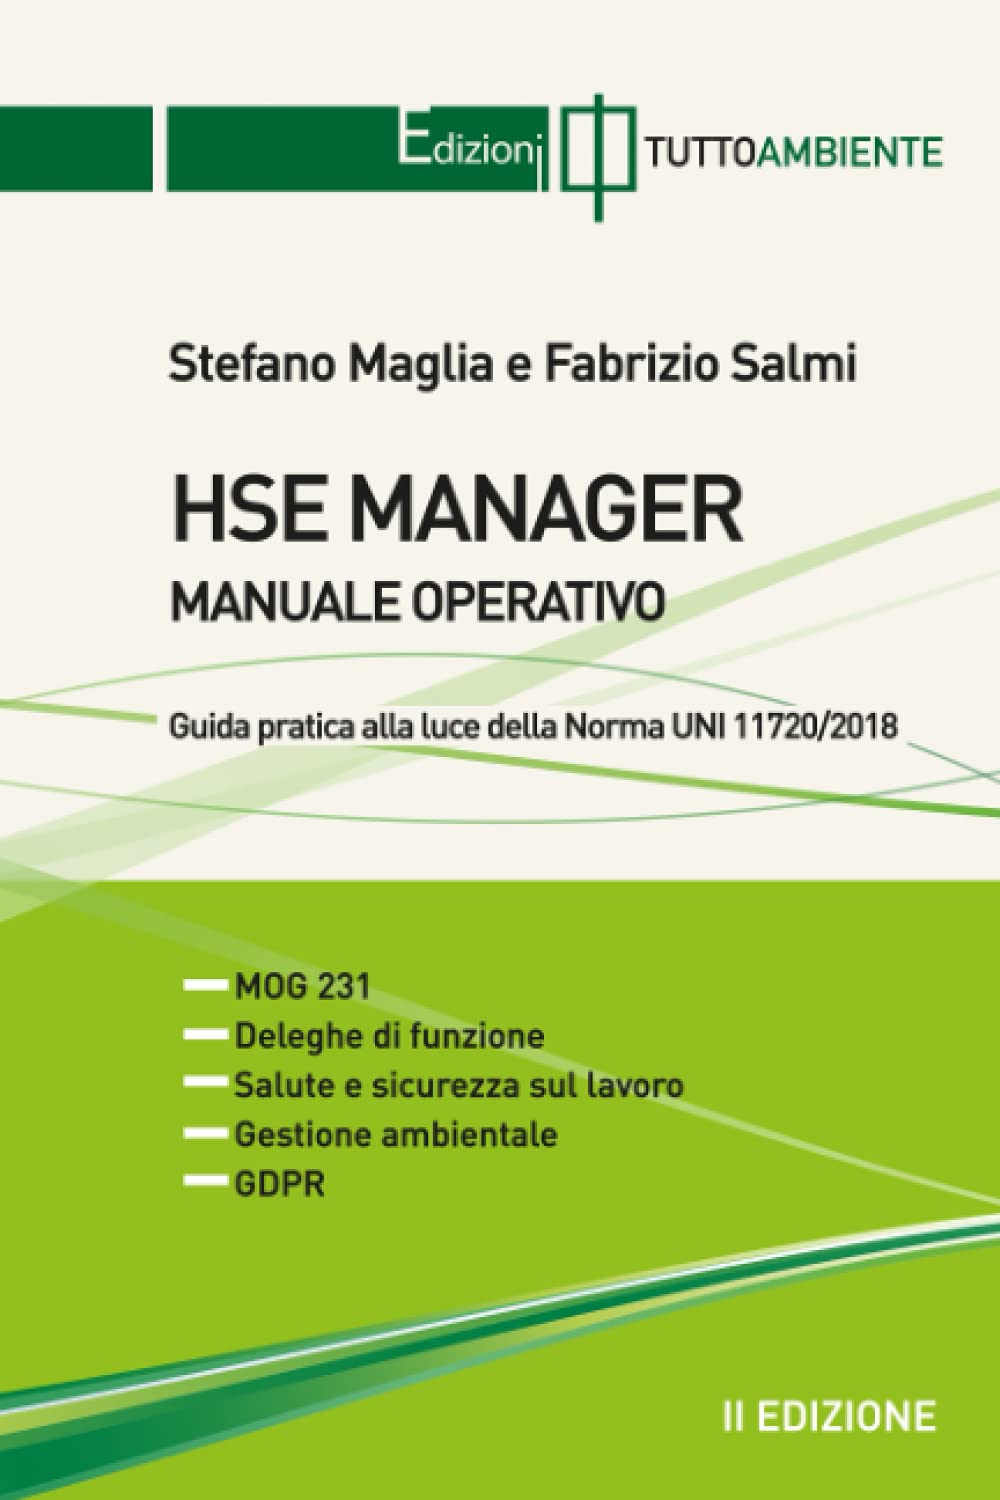 HSE MANAGER